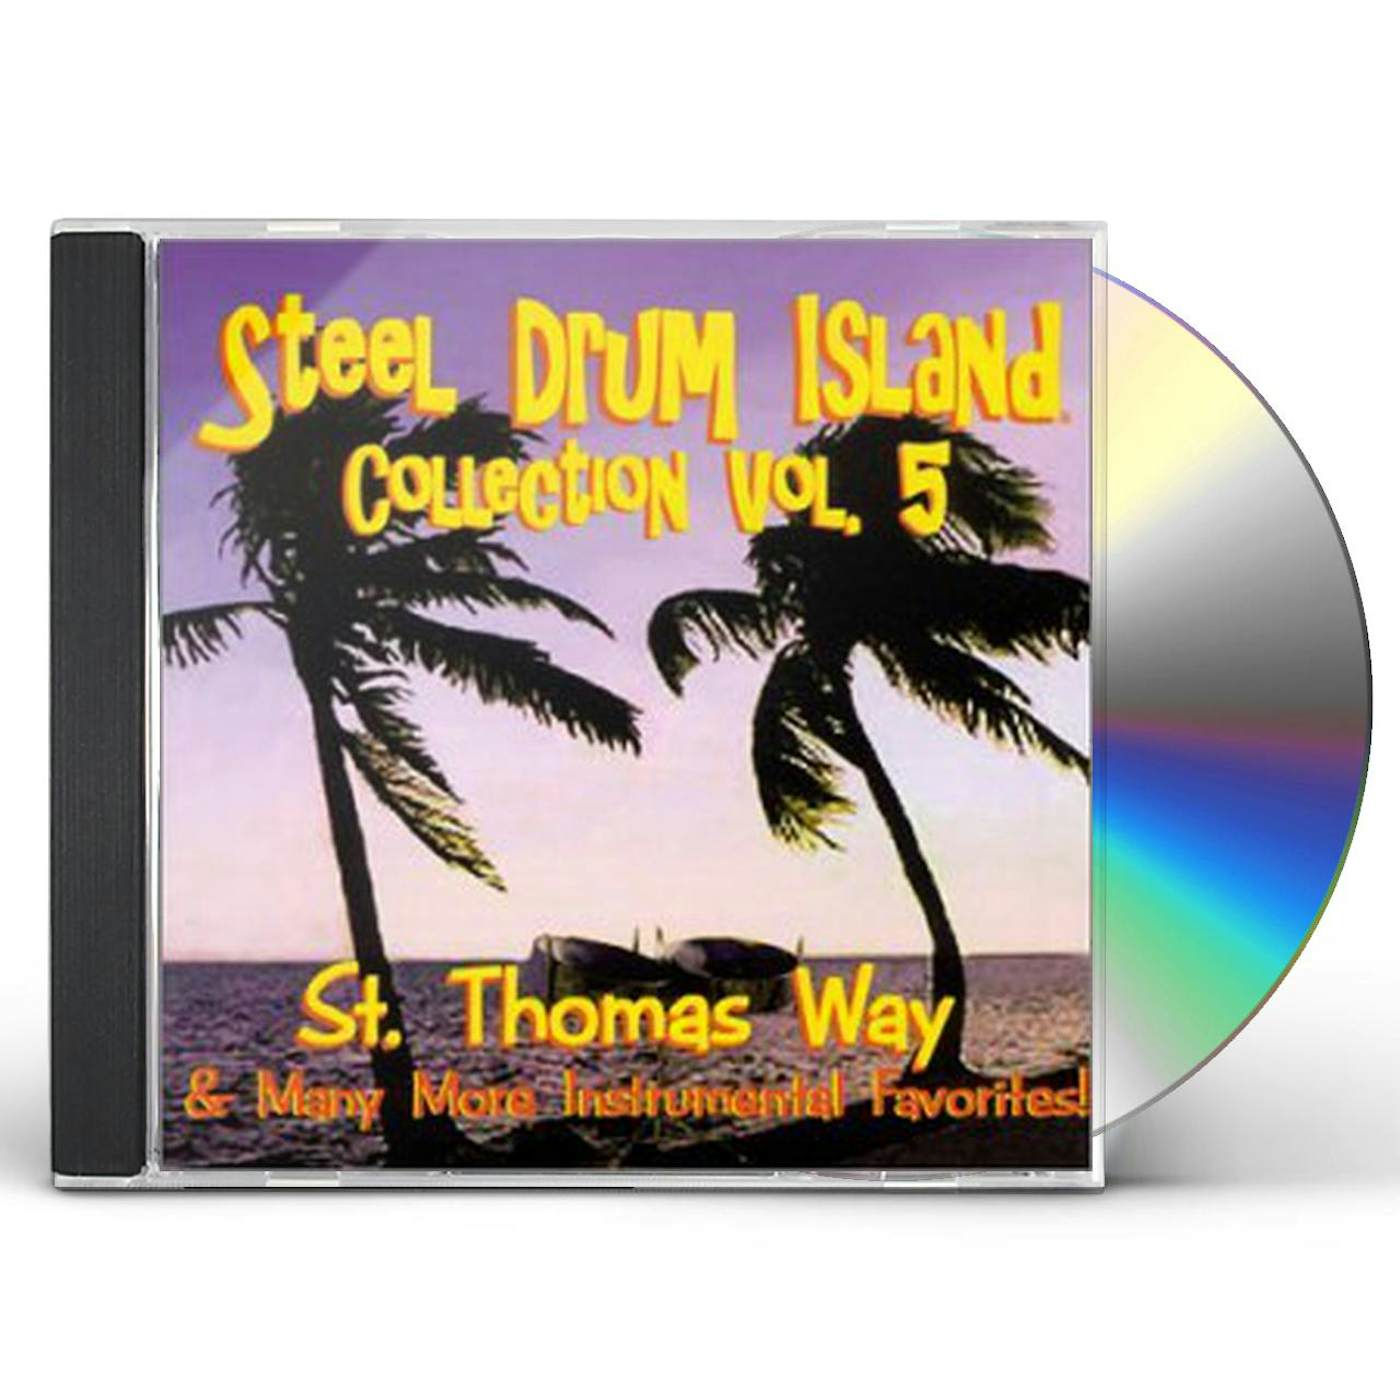 STEEL DRUM ISLAND COLLECTION: ST. THOMAS WAY & MOR CD